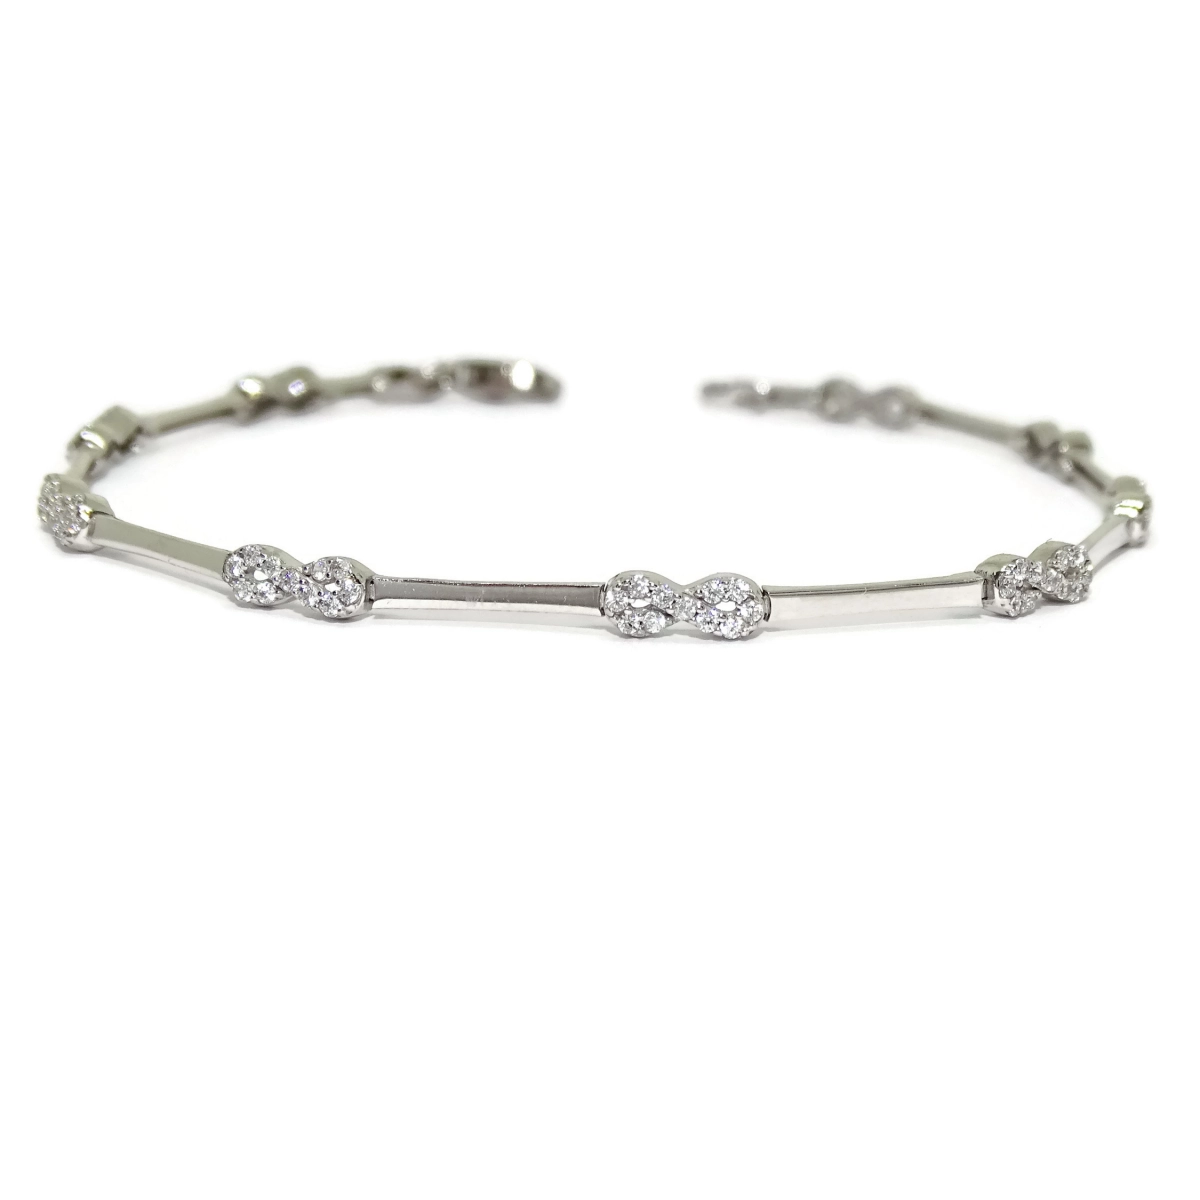 18k white gold bracelet with 9 infinite and circonitas Never say never